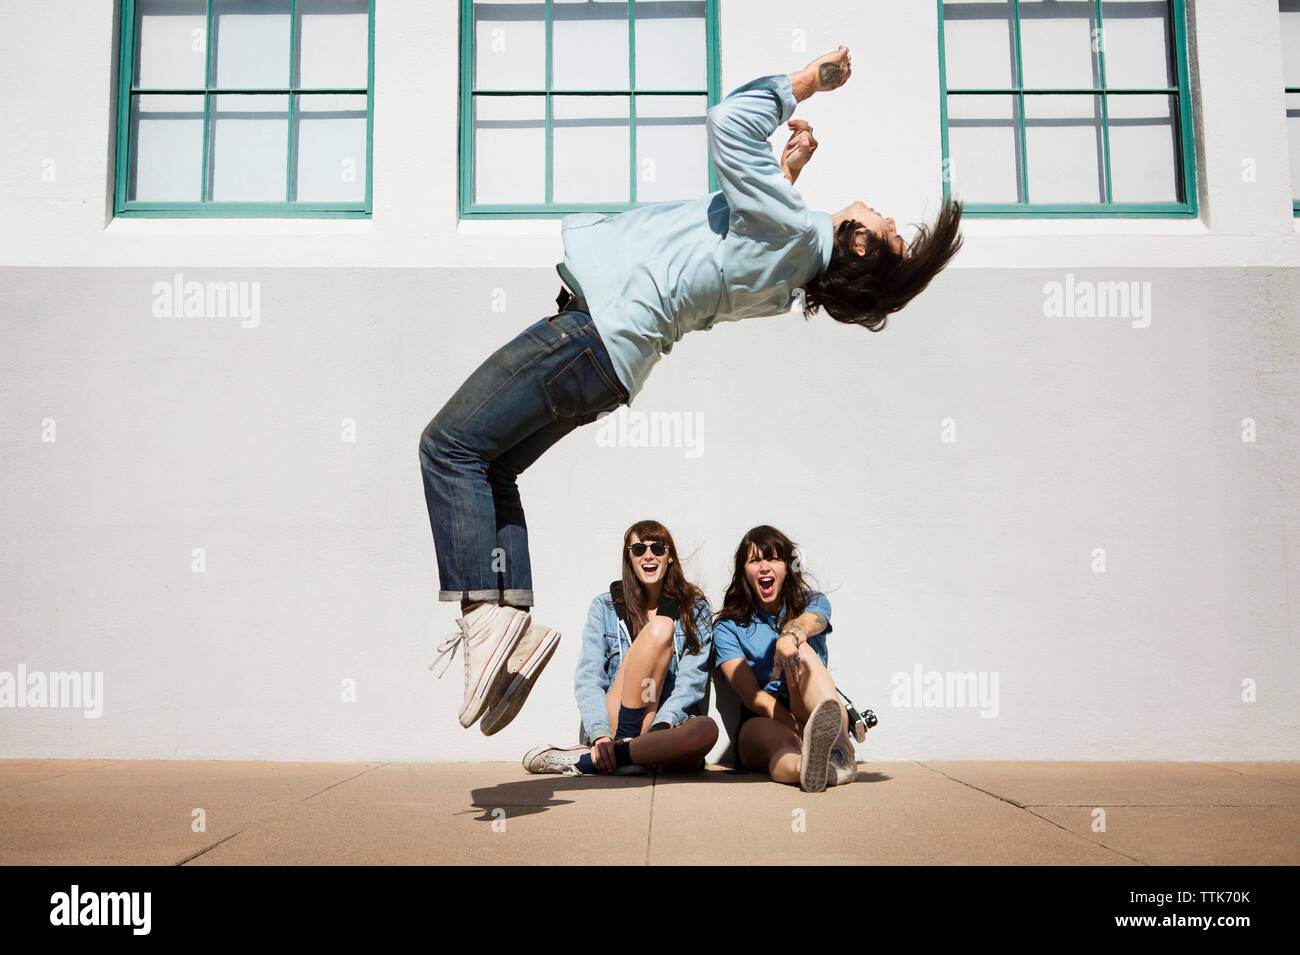 Man doing somersault while friends sitting against wall Stock Photo